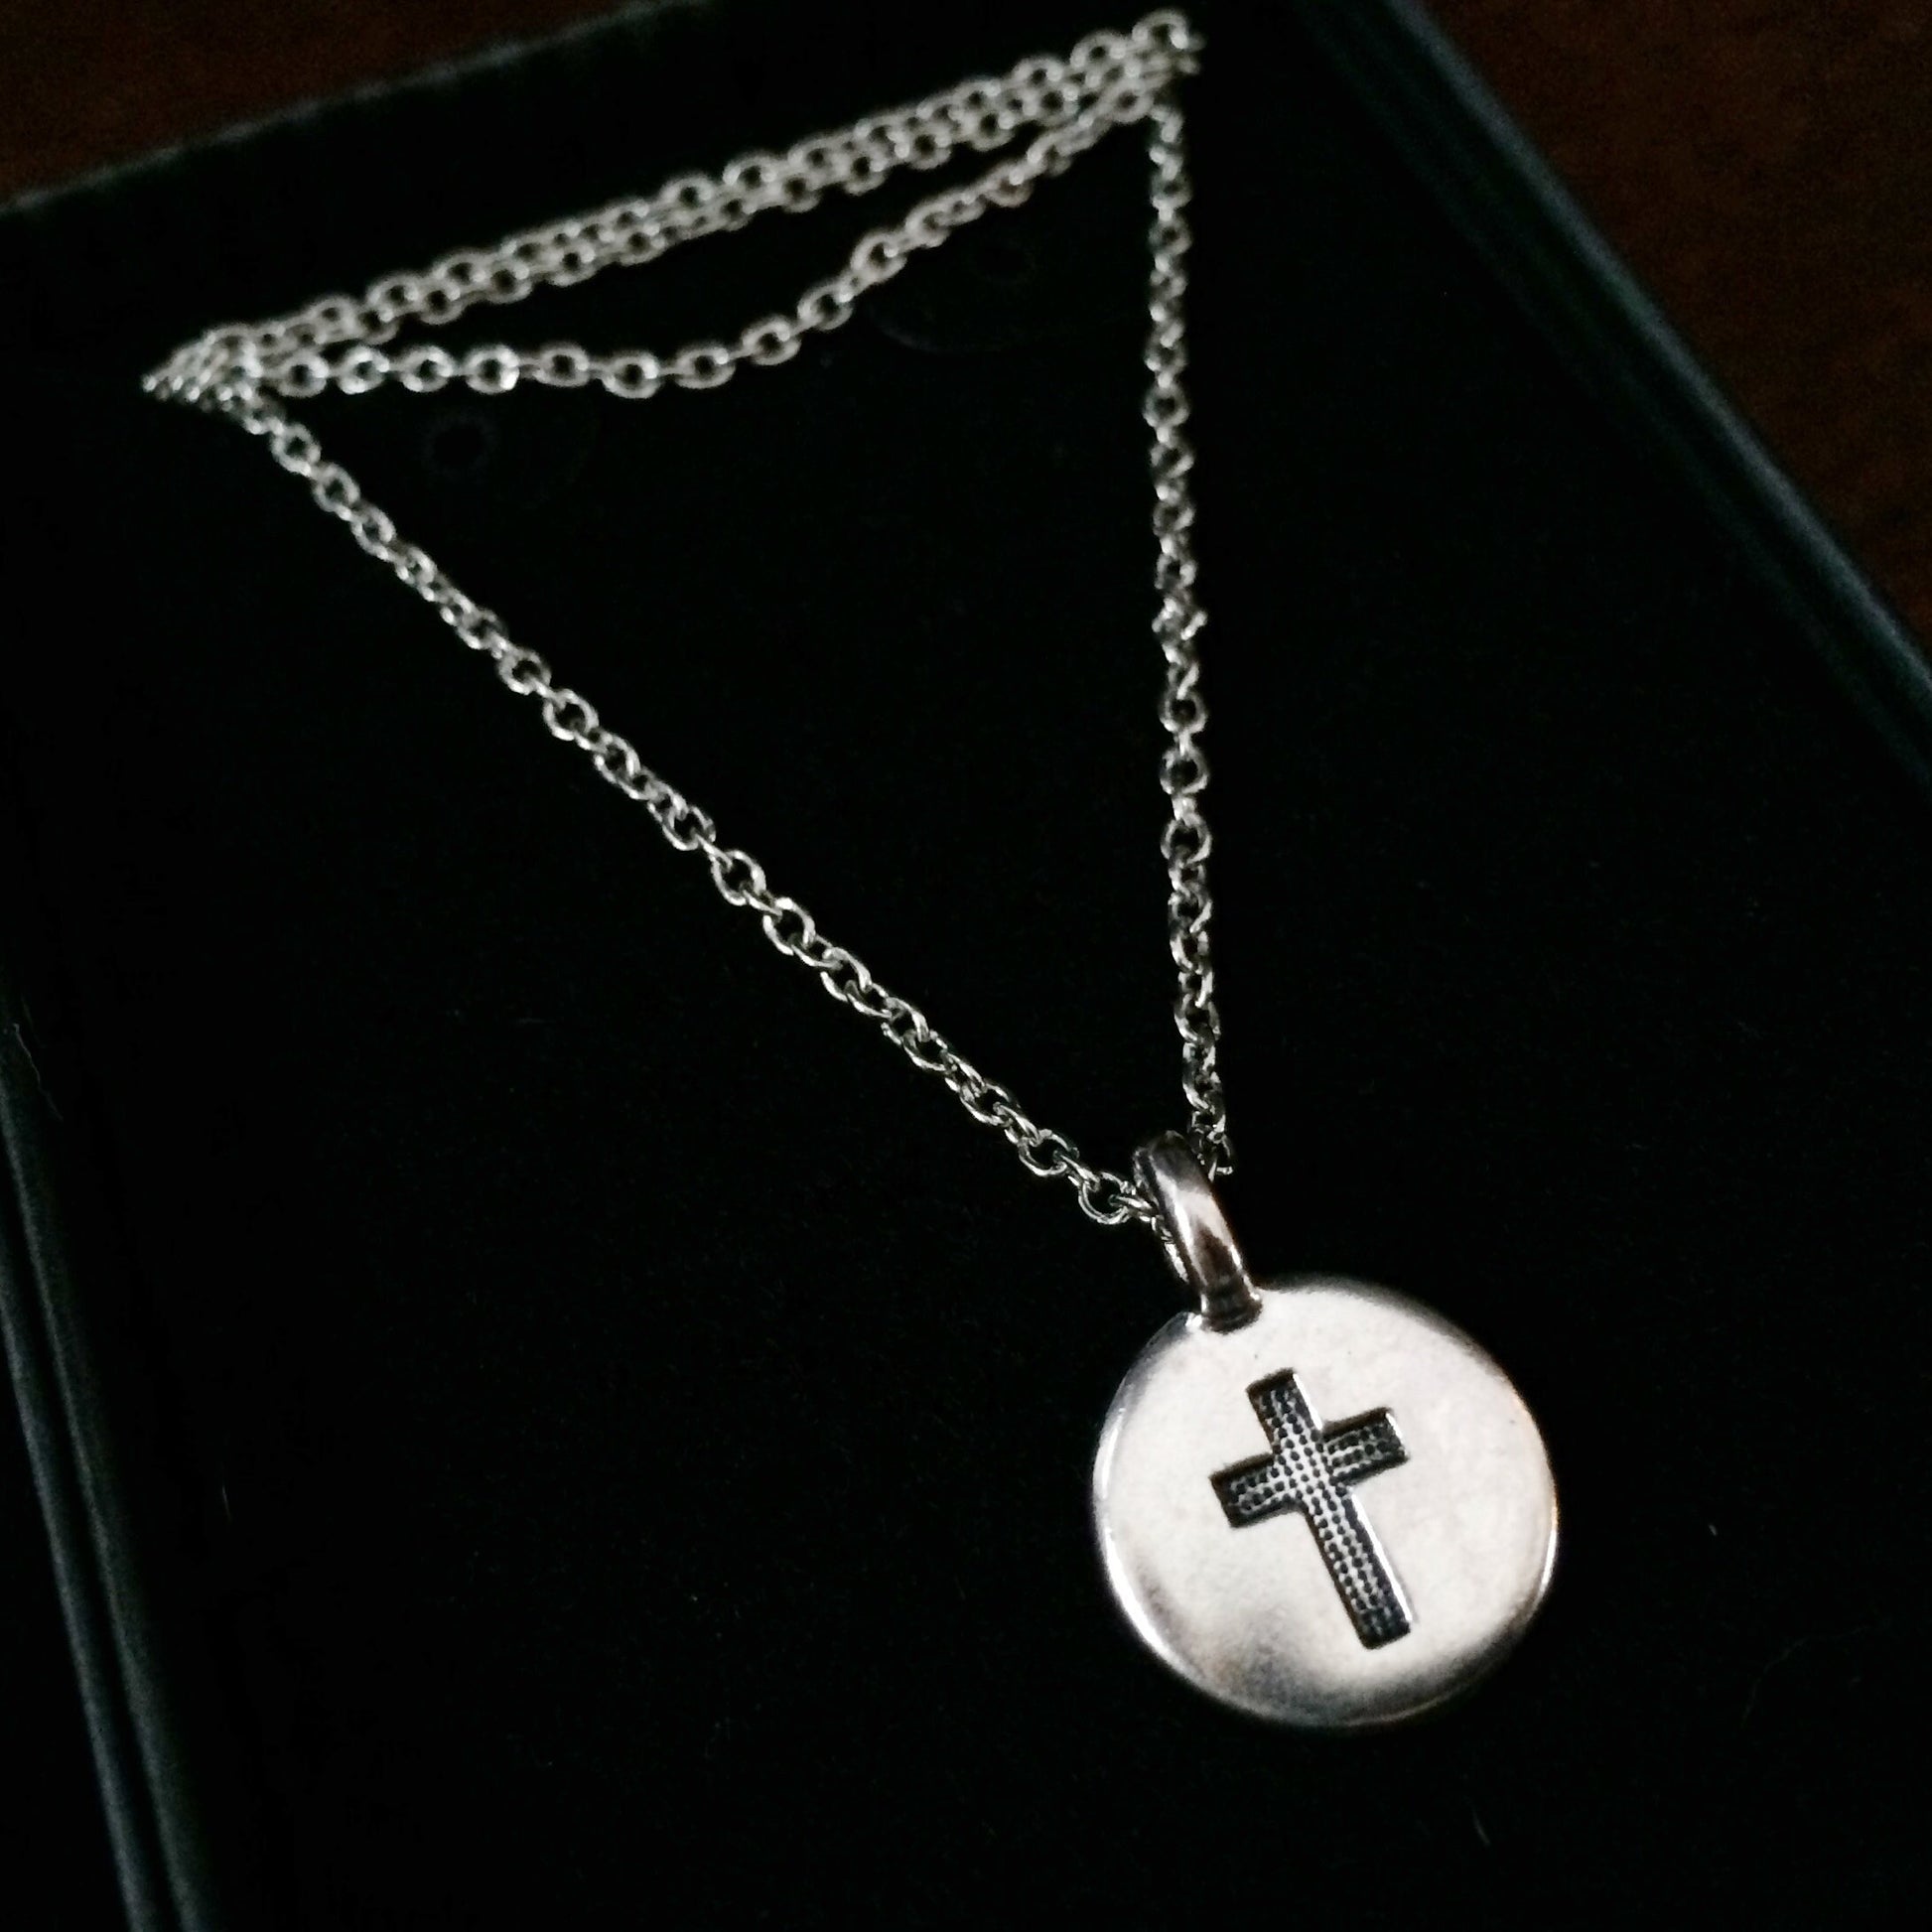 Small Cross Charms for Jewelry Making in Silver Pewter » Cross Charm